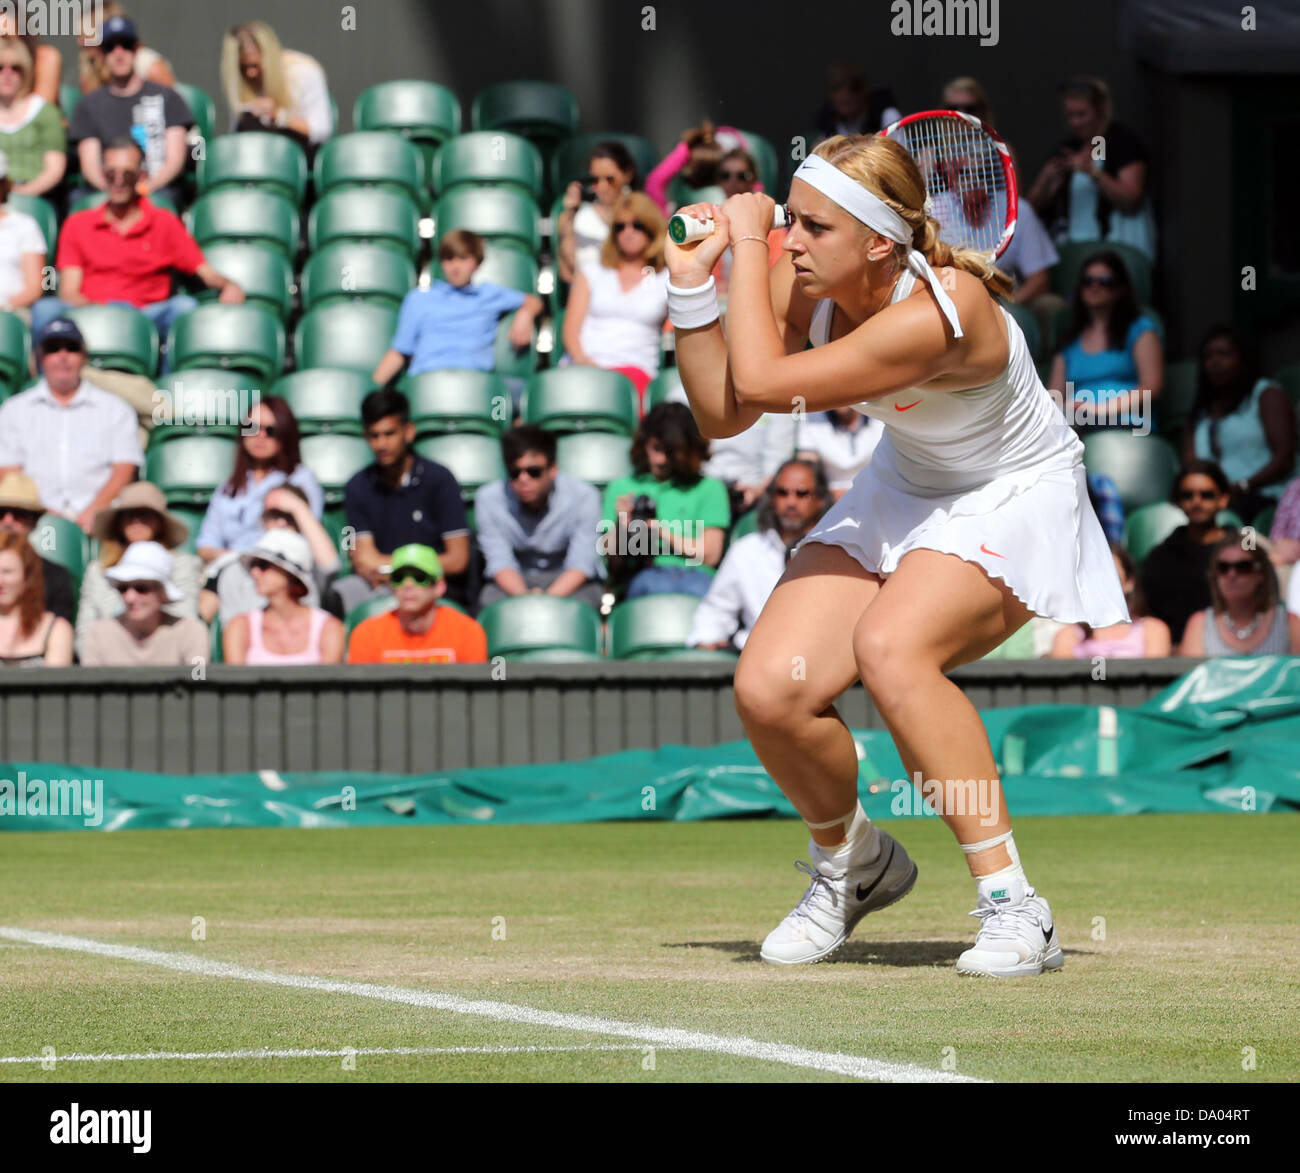 Wimbledon, London, UK. 29th June 2013. Day Six of the The Wimbledon Tennis Championships 2013 held at The All England Lawn Tennis and Croquet Club, London, England, UK. Samantha Stosur ( AUS) against Sabine Lisicki ( GER) © Action Plus Sports Images/Alamy Live News Credit: Action Plus Sports/Alamy Live News Stock Photo